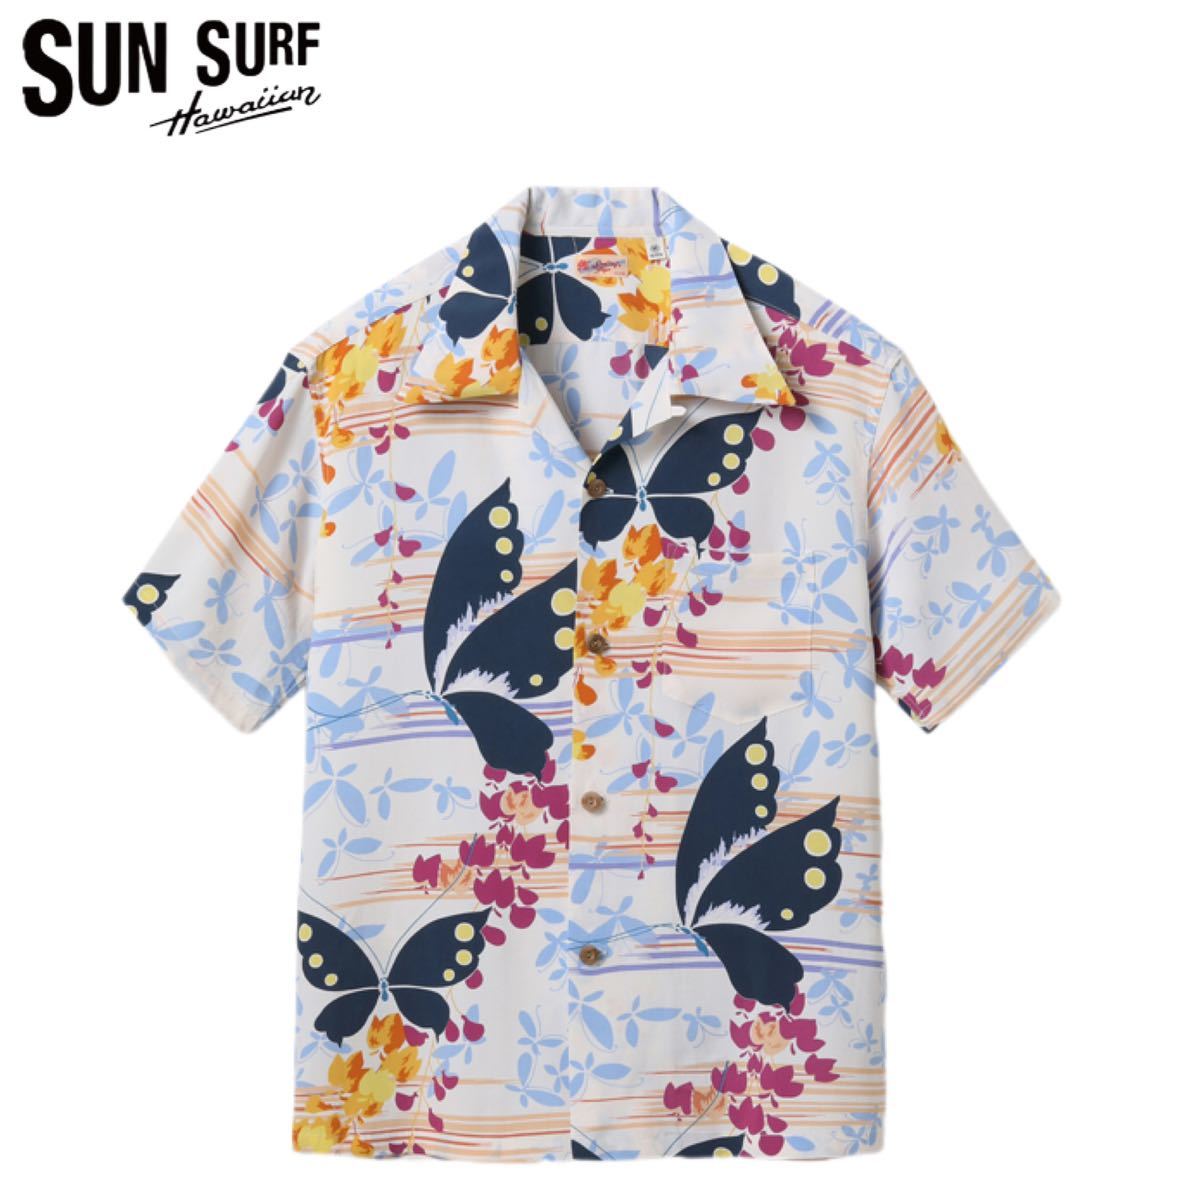 SUN SURF 105OFFWHITE/SIZE M SS39027 “FLUTTERING BEAUTY” サンサーフ アロハシャツ